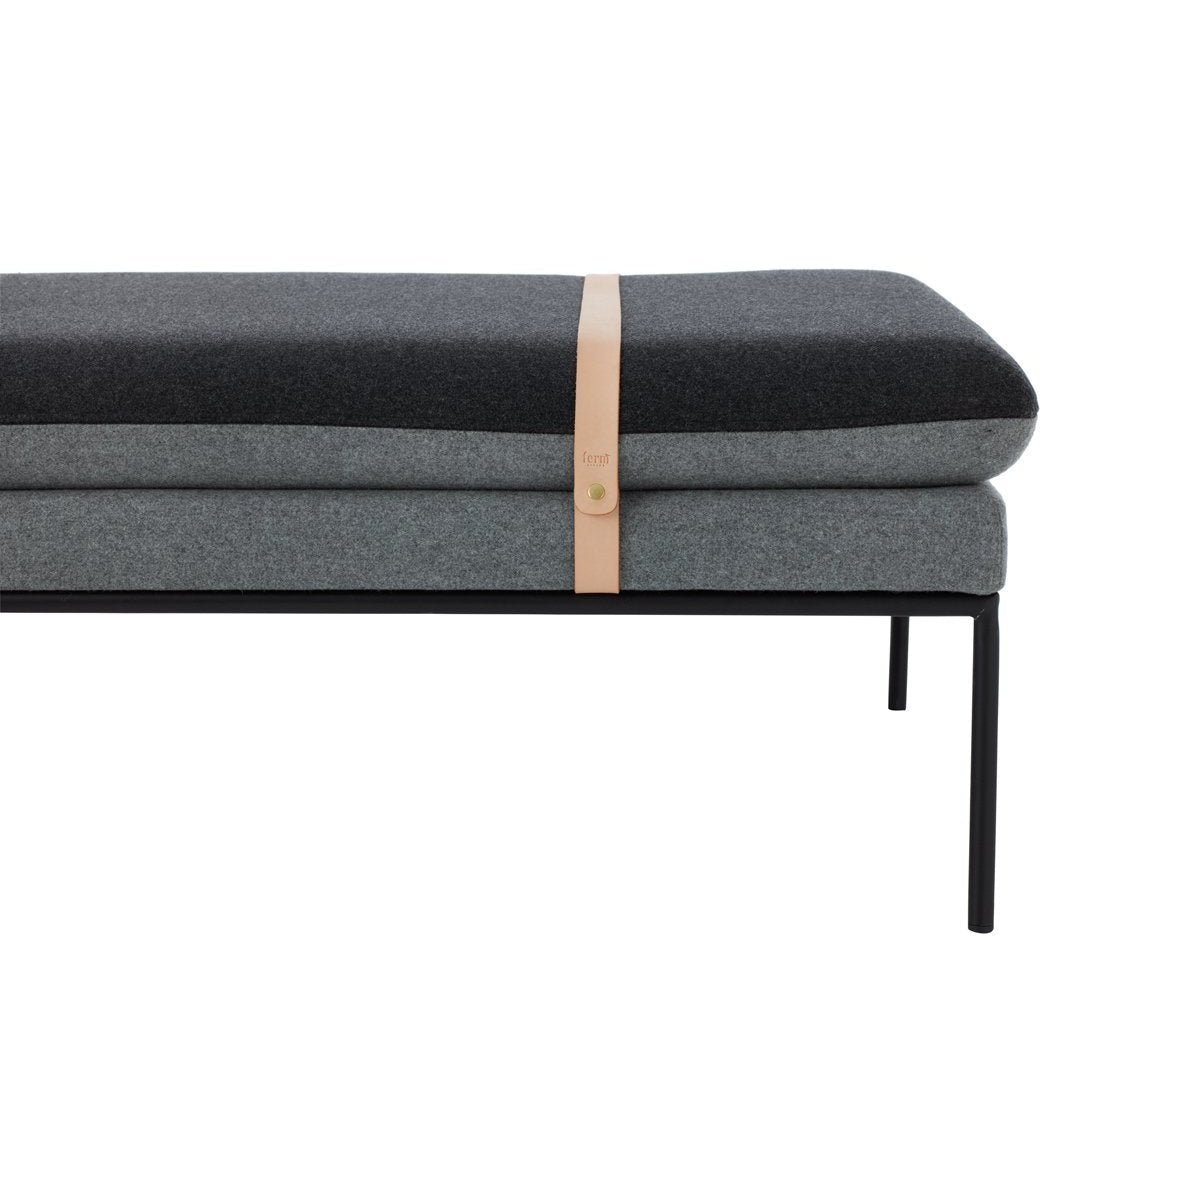 Ferm Living Turn Day Bed wełna, szare